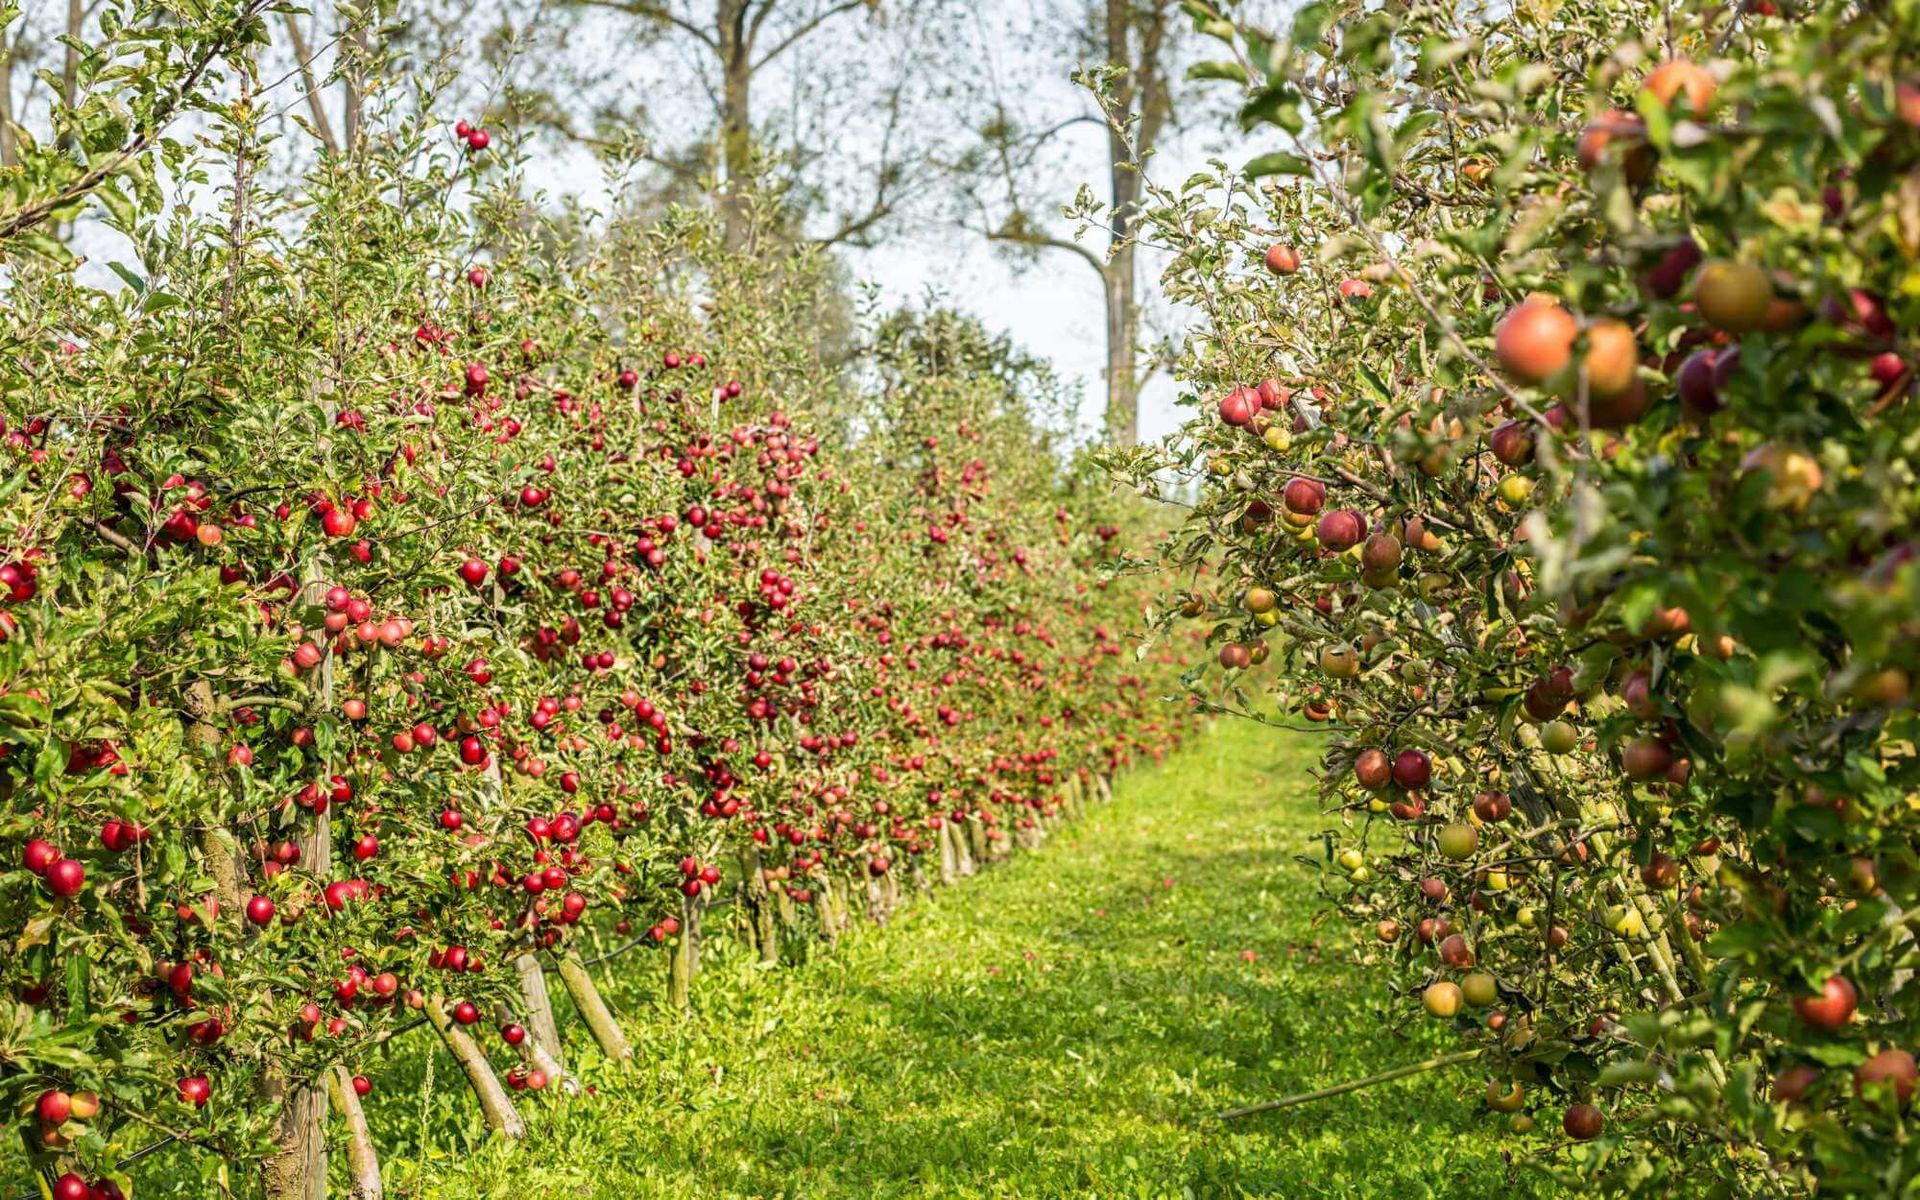 in this apple orchard, plant growth regulators are used to adjust the harvest period